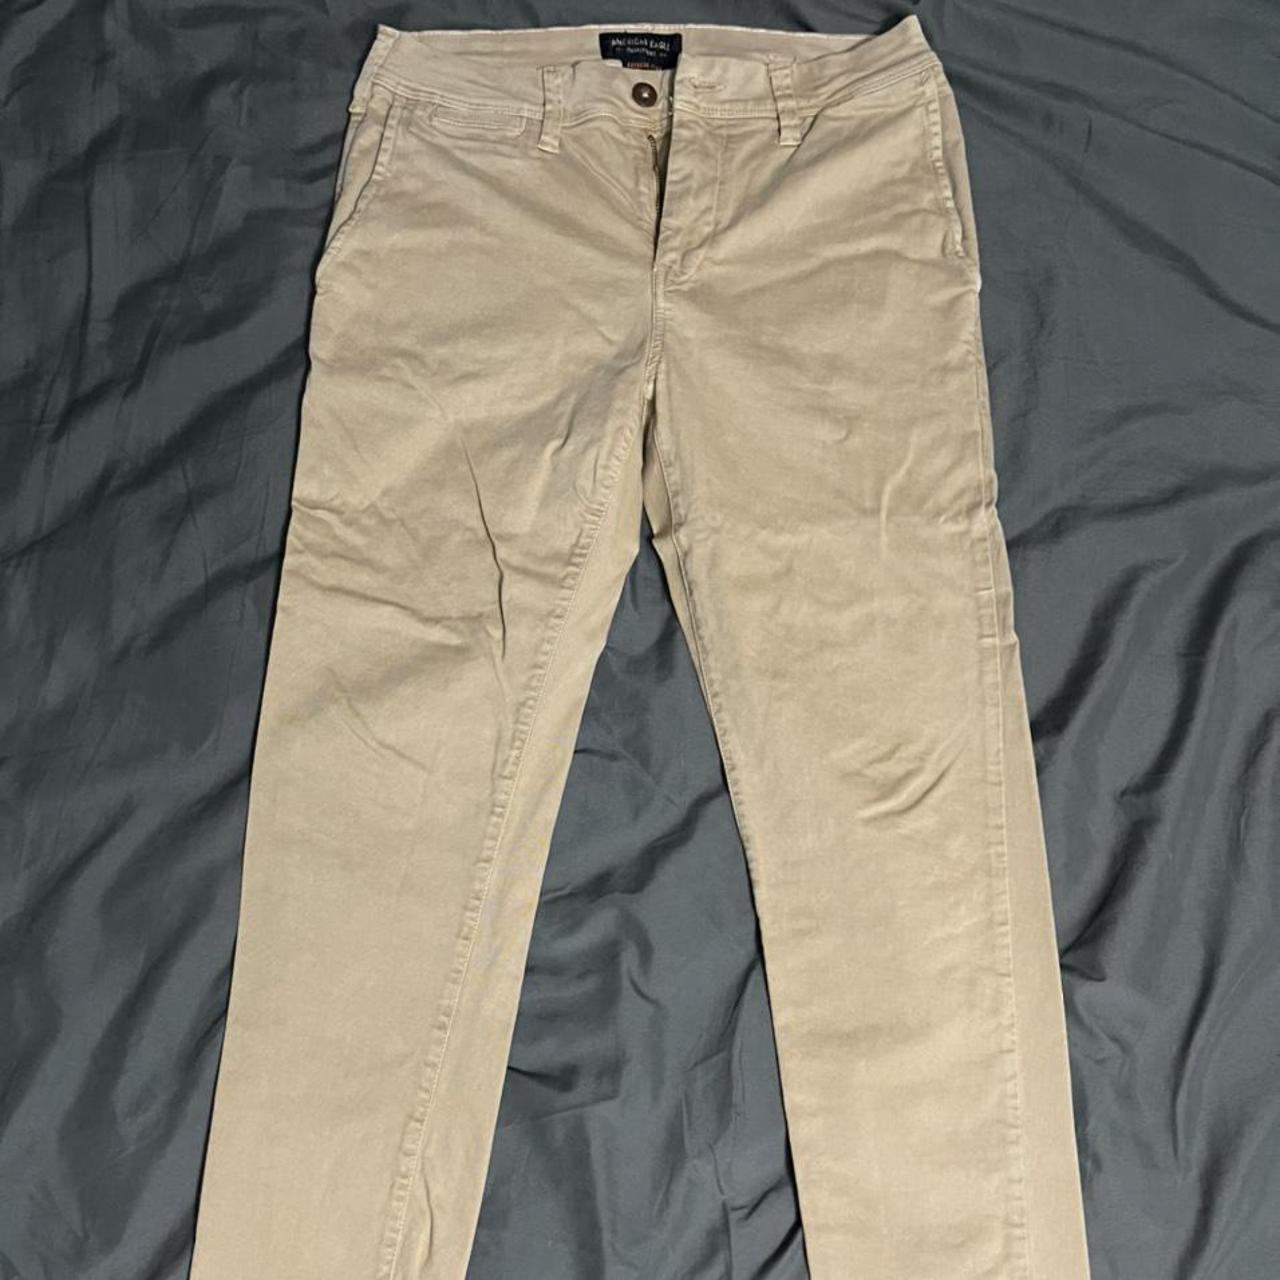 Buy Khaki Jeans for Men by American Eagle Outfitters Online  Ajiocom